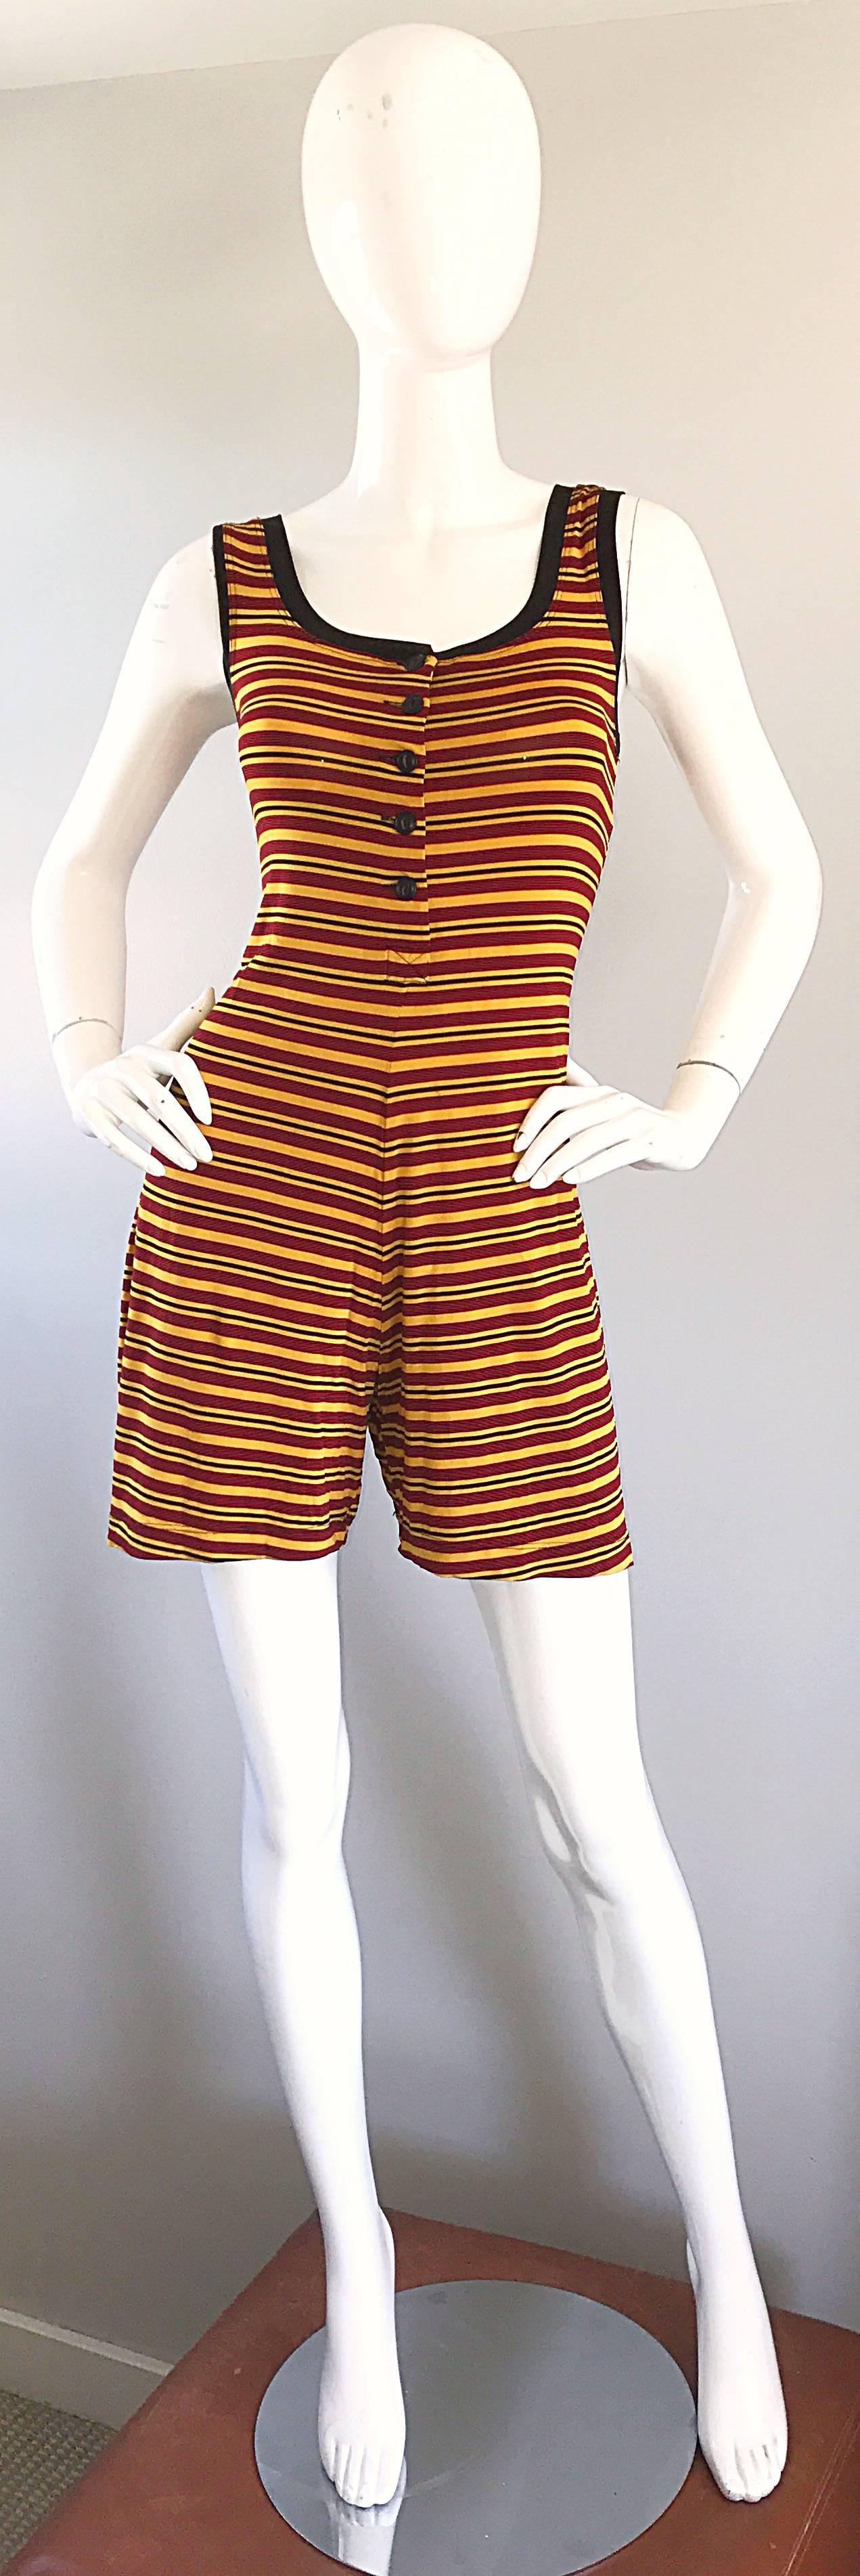 Chic 1990s does 1920 BETSEY JOHNSON yellow and burgundy striped romper, onesie, jumpsuit, or playsuit! Fantastic soft rayon jersey stretches to fit. Buttons up the bodice for controlled cleavage exposure. 1920s men's style. Great with sandals,